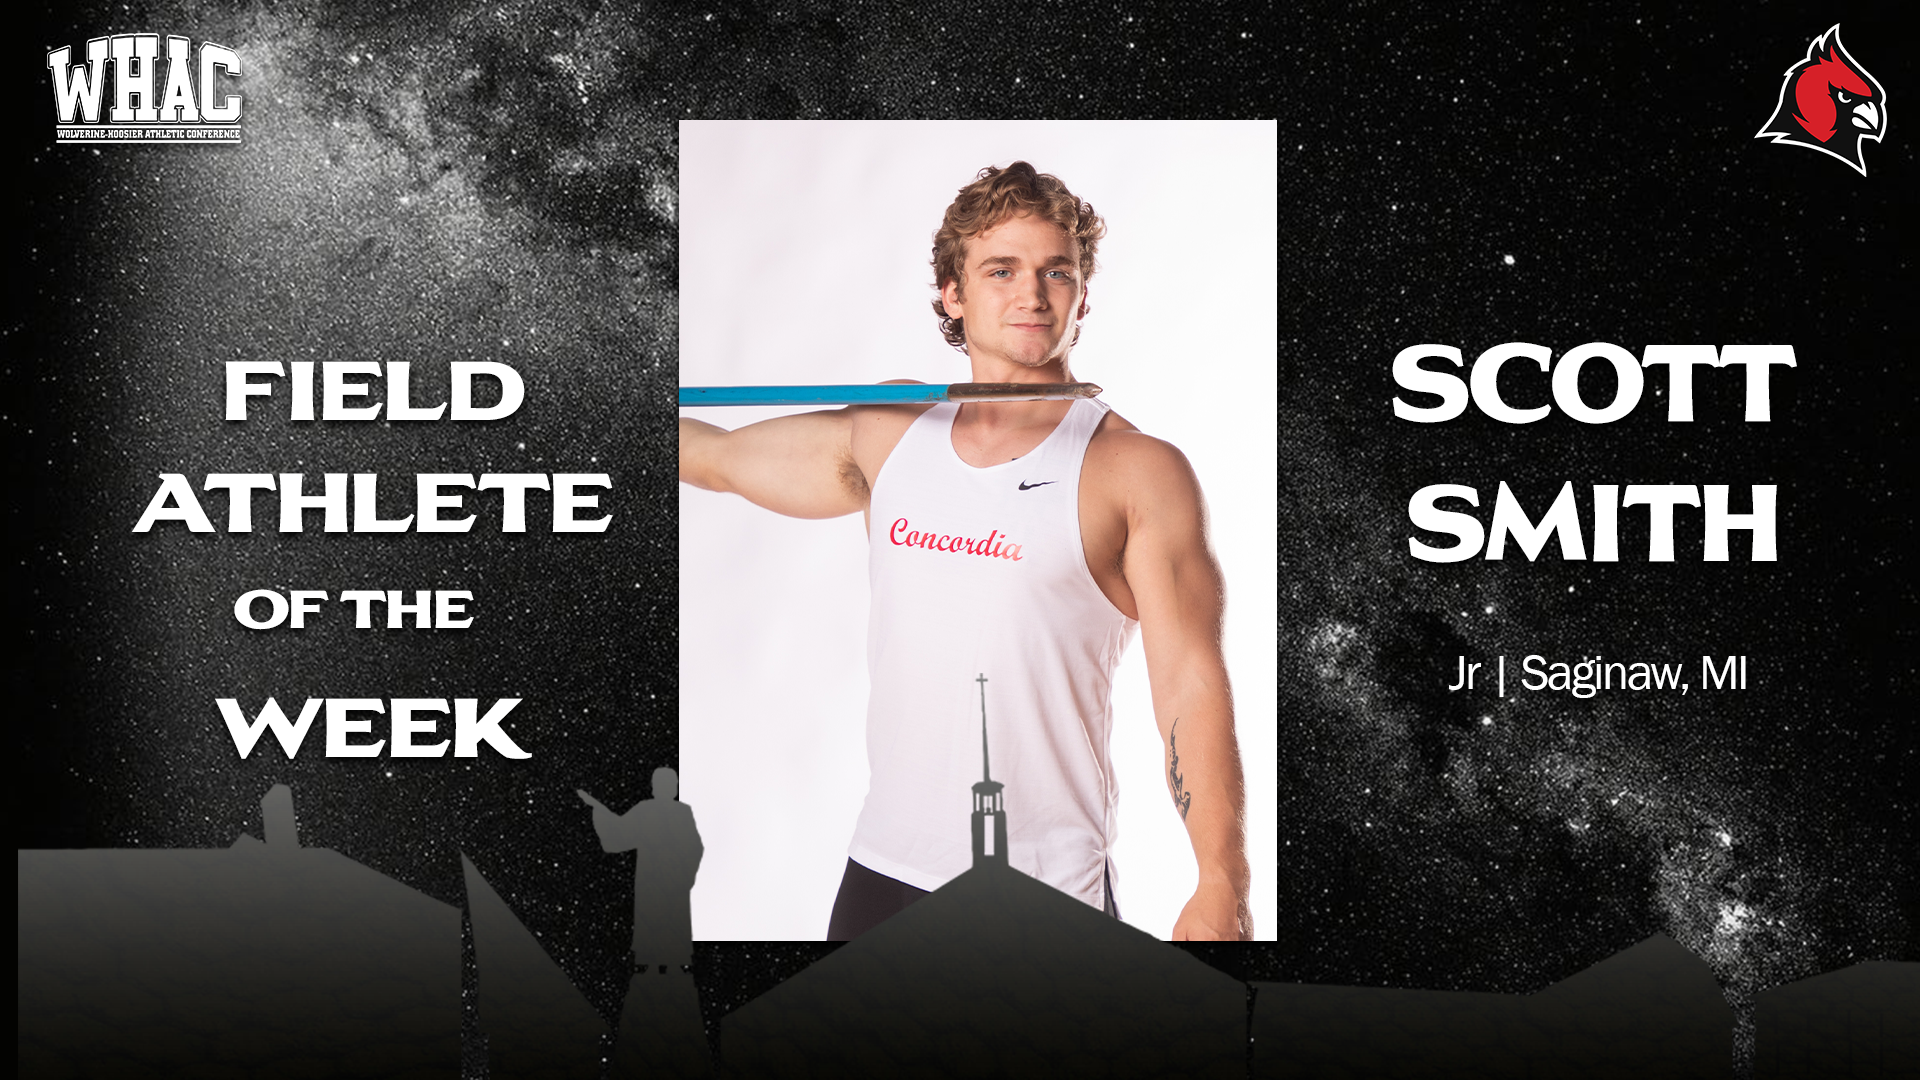 Scott Smith wins WHAC Field Athlete of the Week